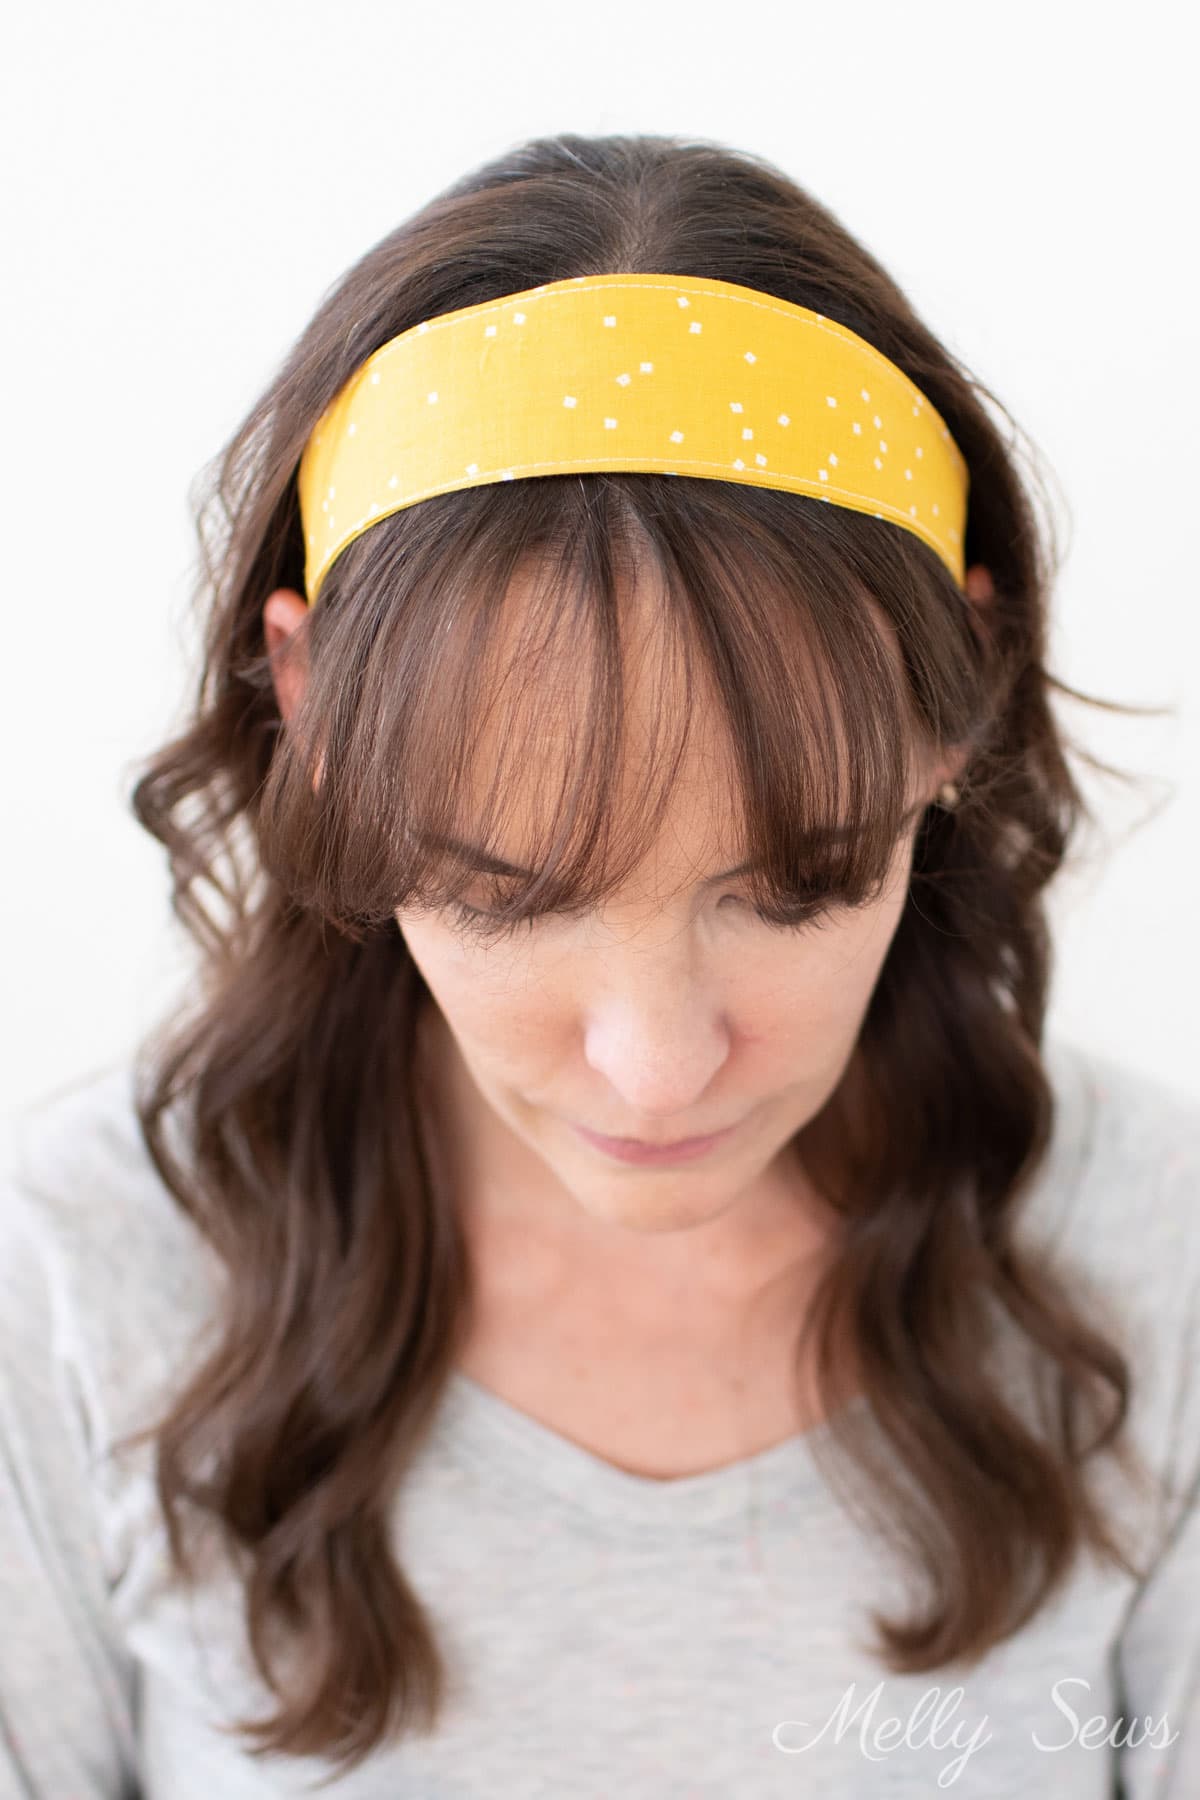 Woman with dark brow hair wearing a gold colored fabric headband